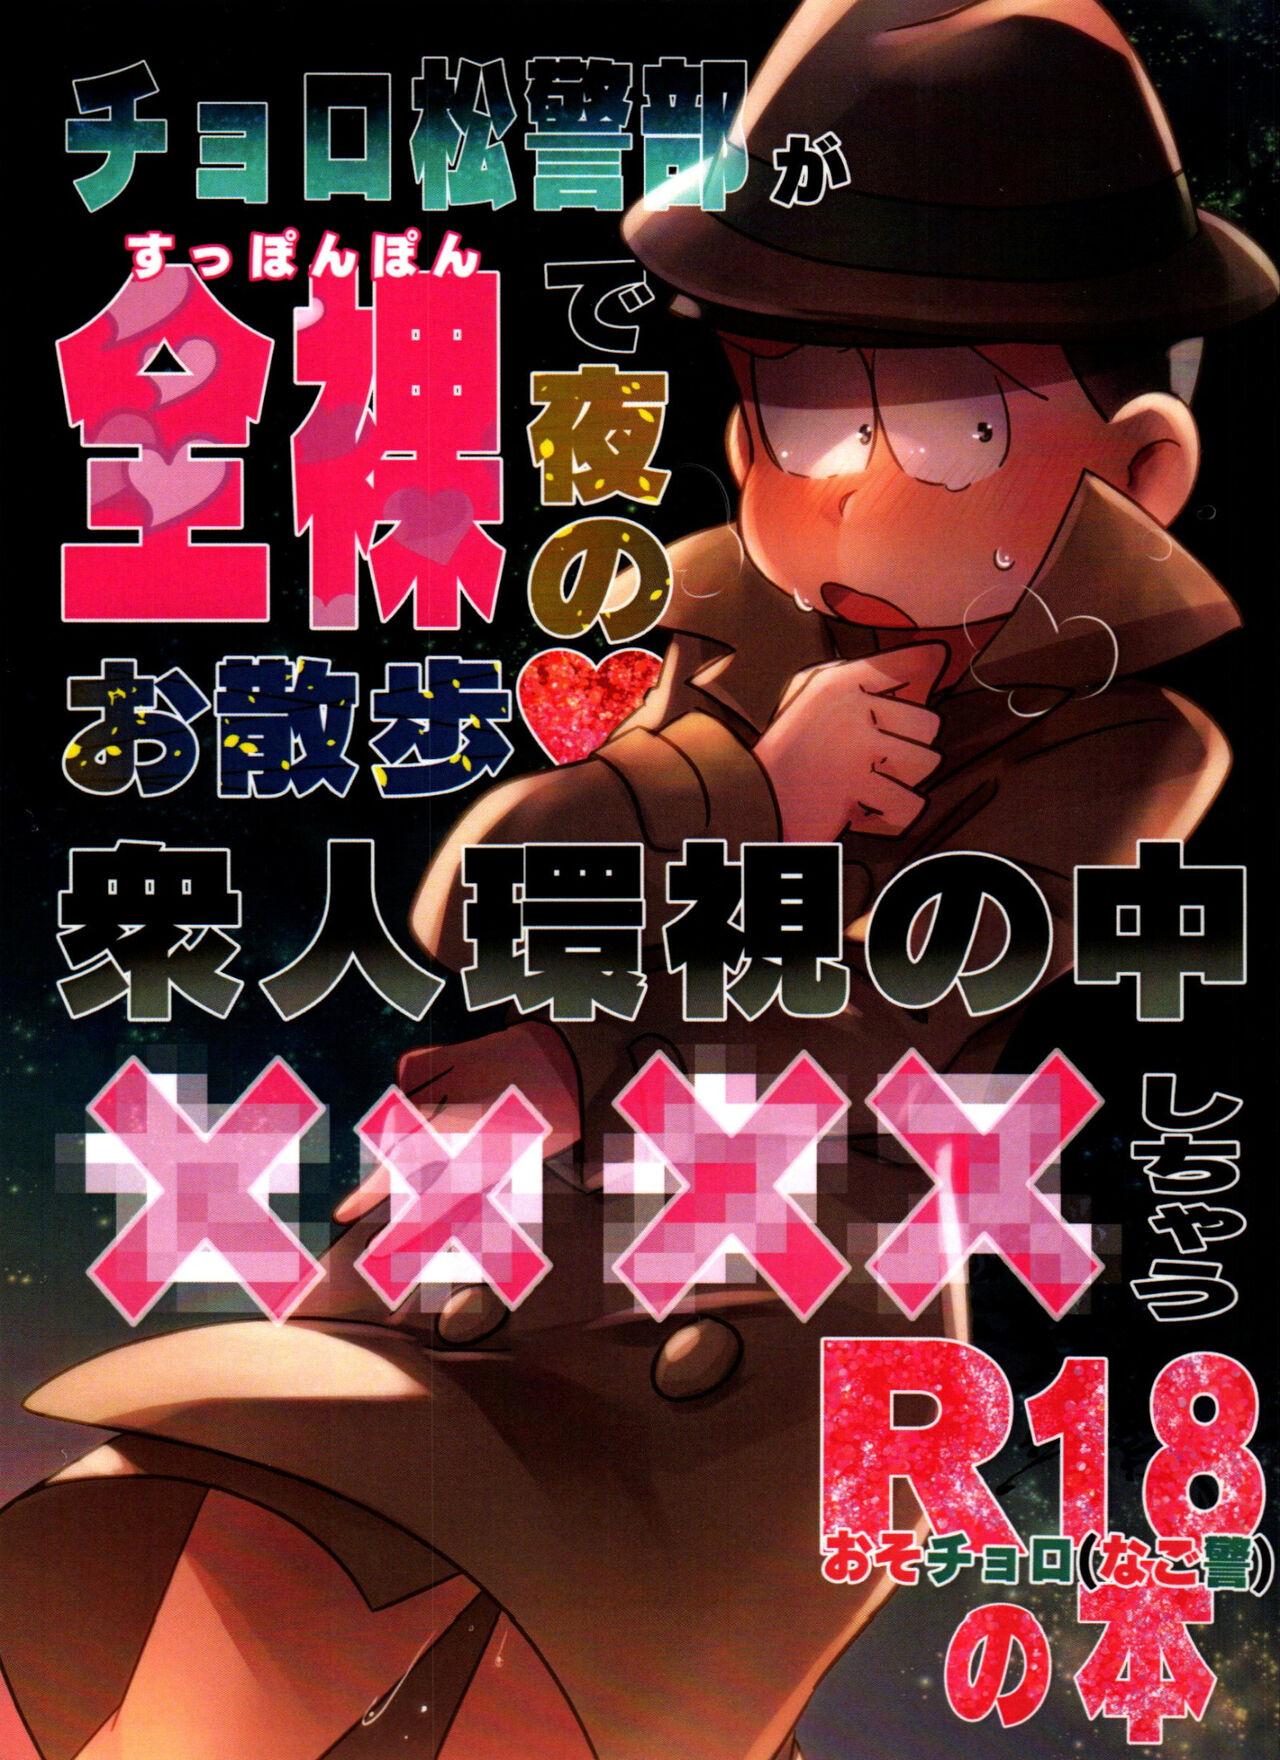 Inspector Choromatsu walks naked at night and does XXX in the public eye R18 book 0